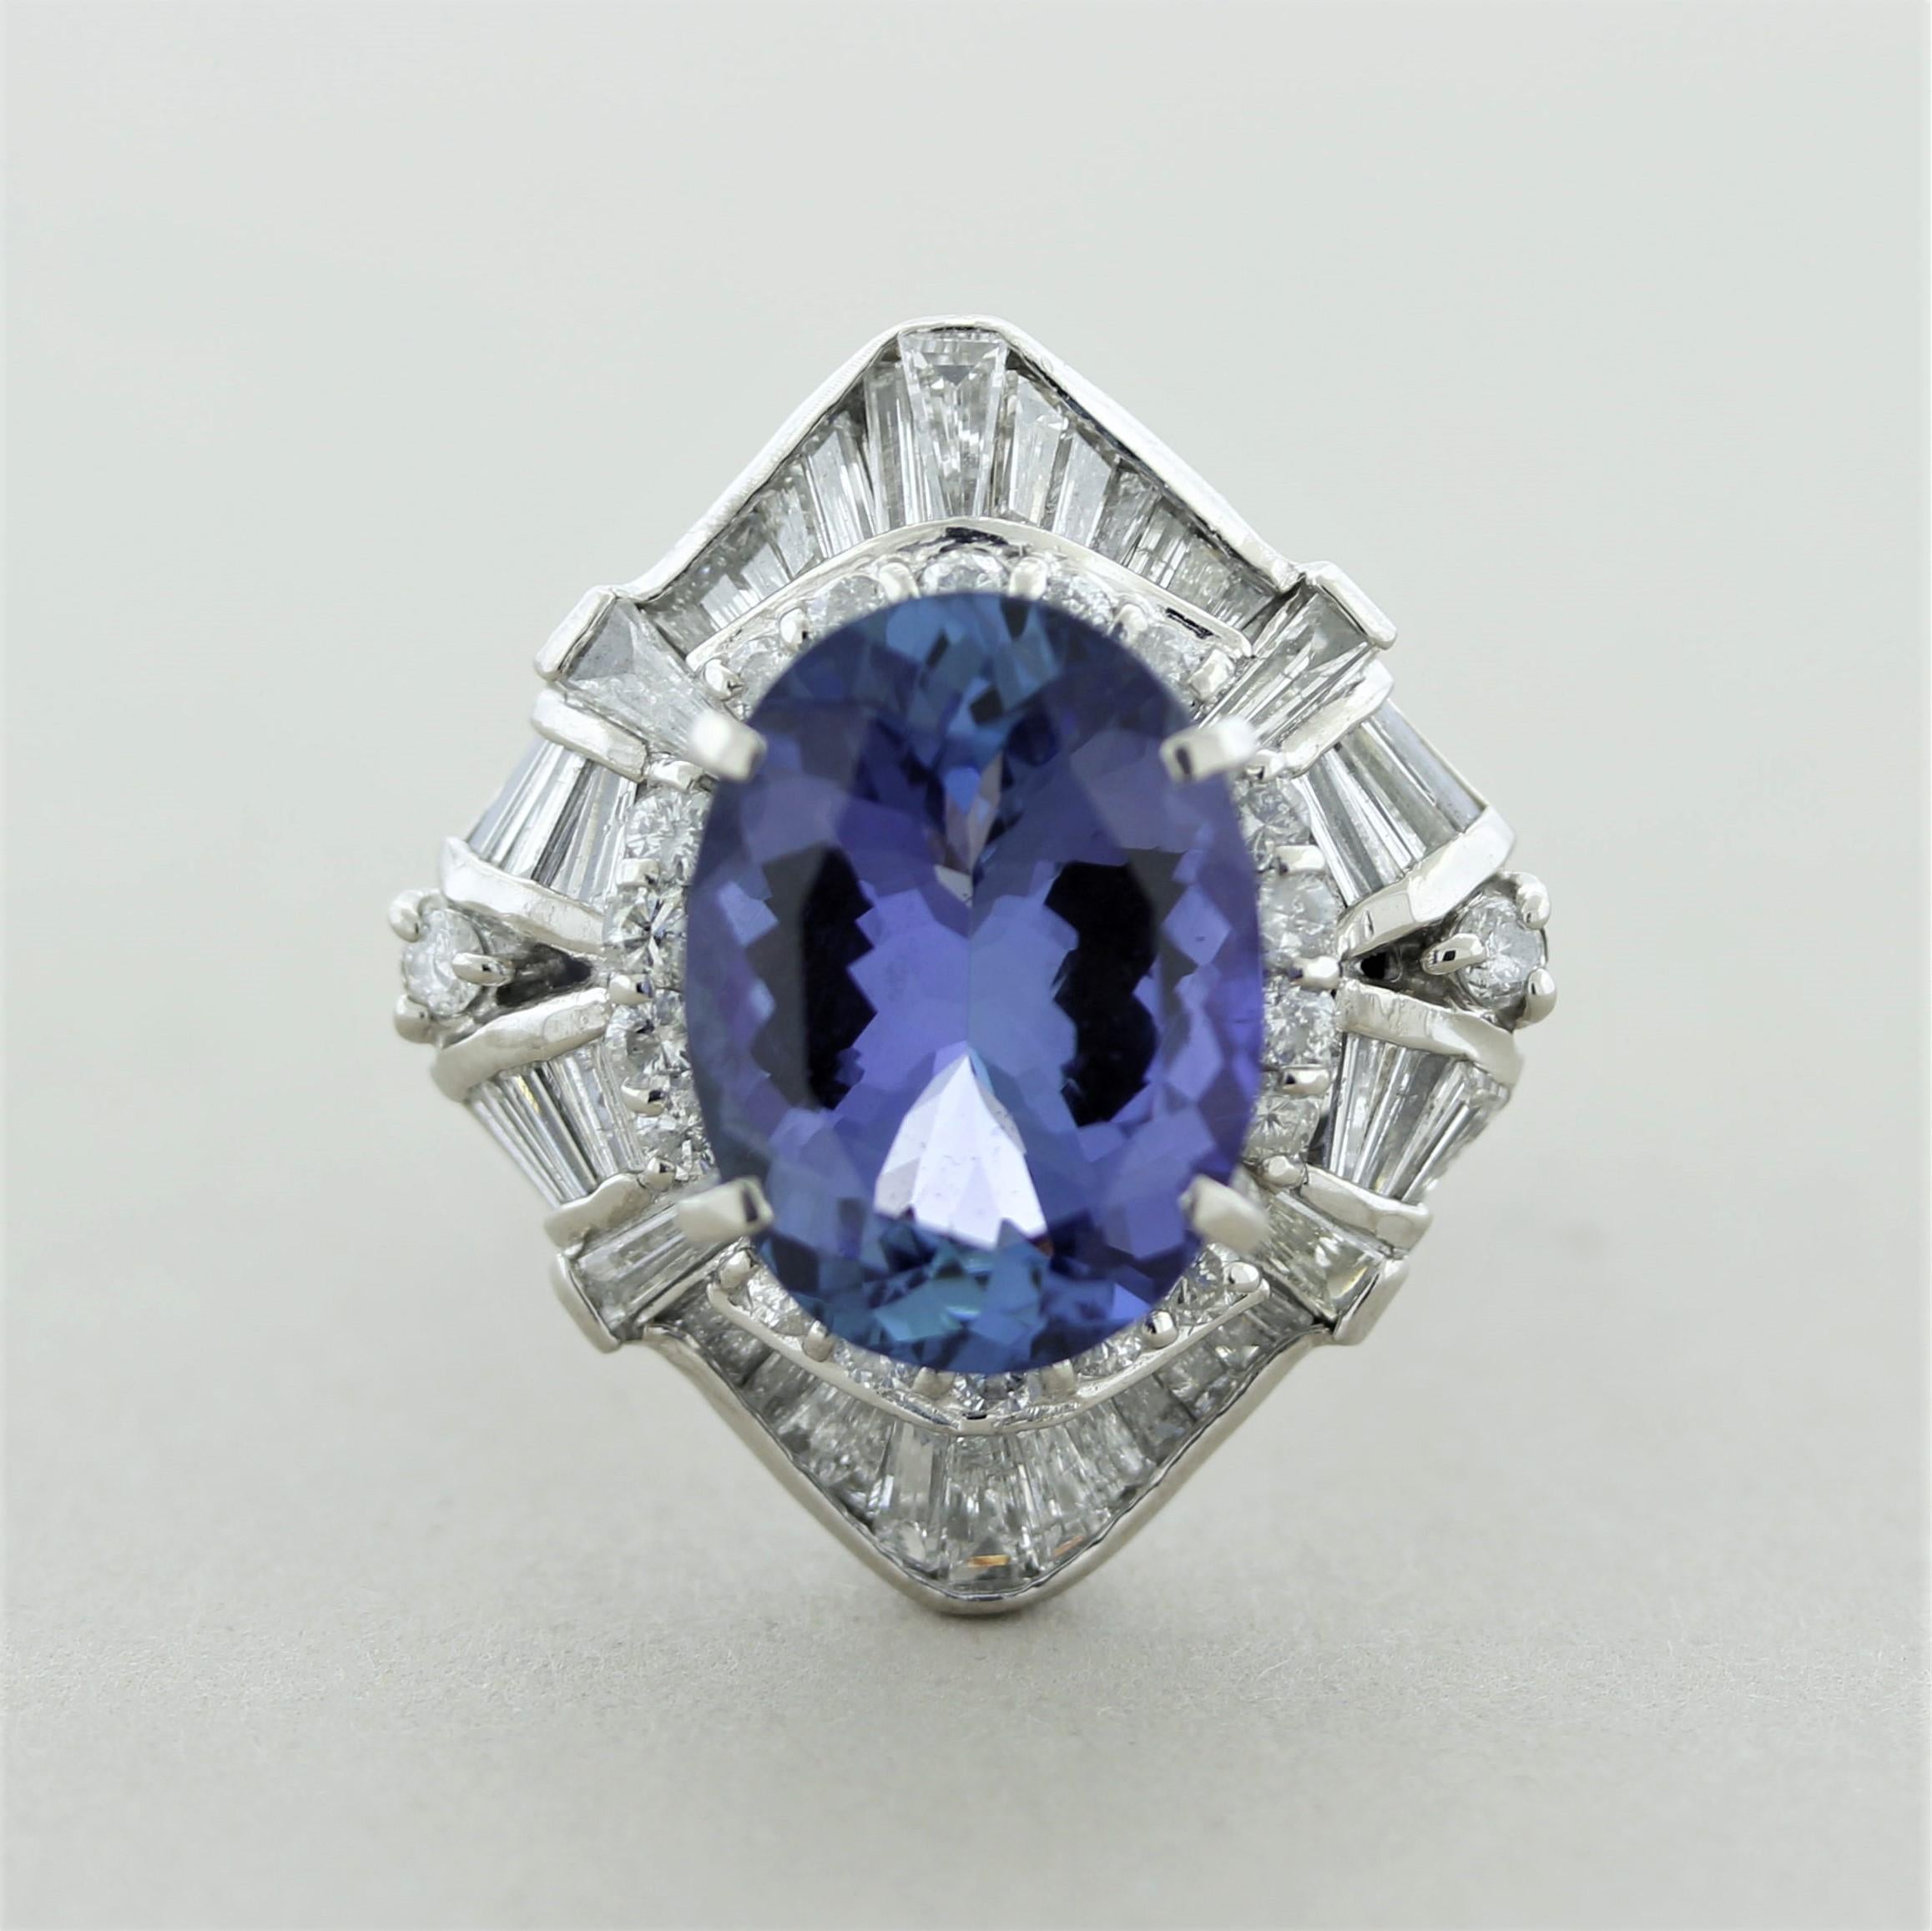 A big and bold cocktail ring featuring a 8.32 carat oval-shaped tanzanite. Tanzanite is known for its pleochroism, ability to see two when viewed at different angles, showing both blue and a rich purple color. The stone is cut in a way where both